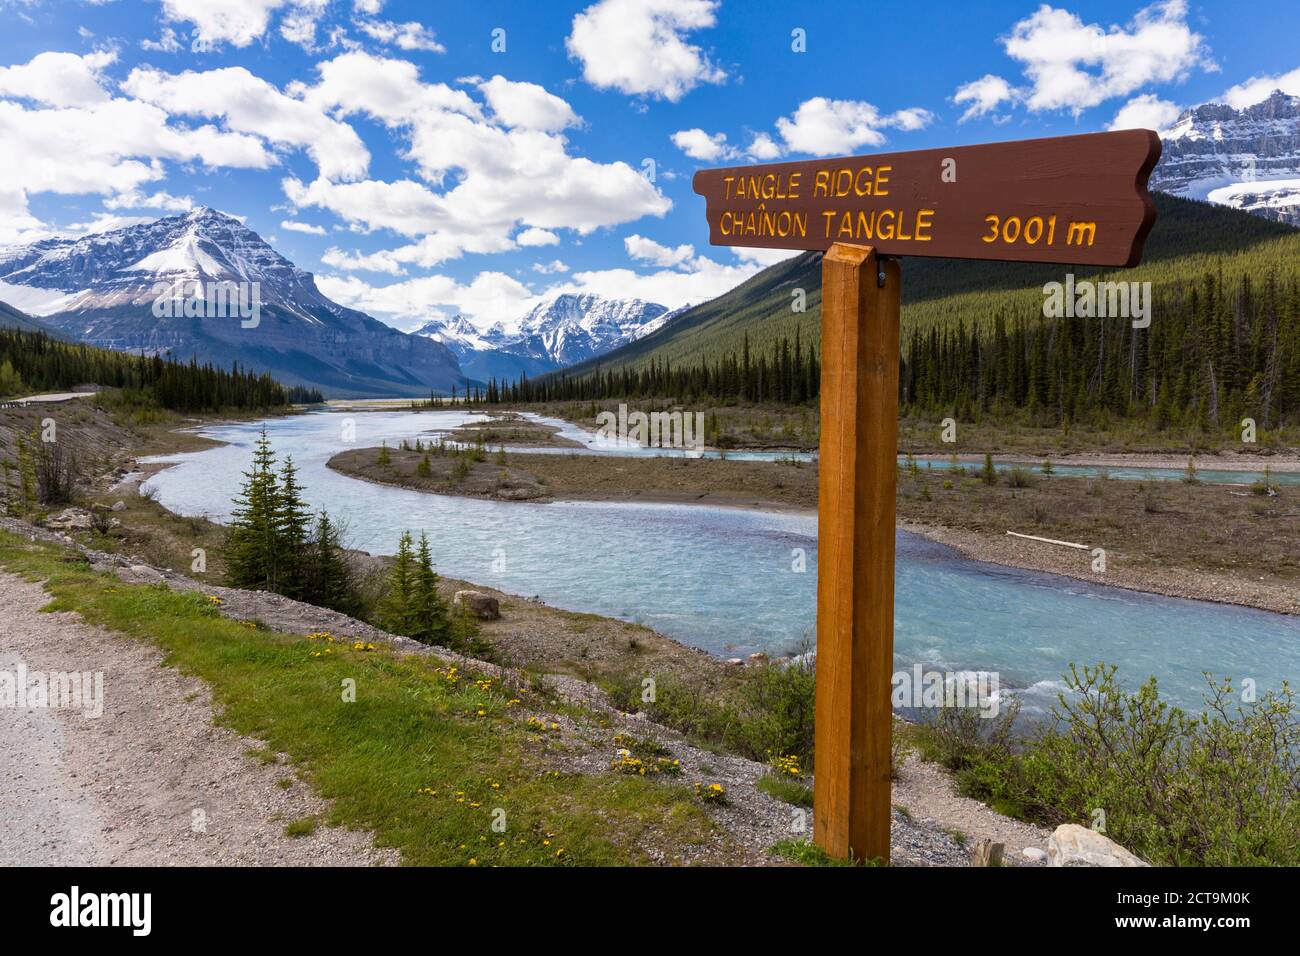 Canada, Alberta, Jasper National Park, Banff National Park, Icefields Parkway, sign at Athabasca River Stock Photo